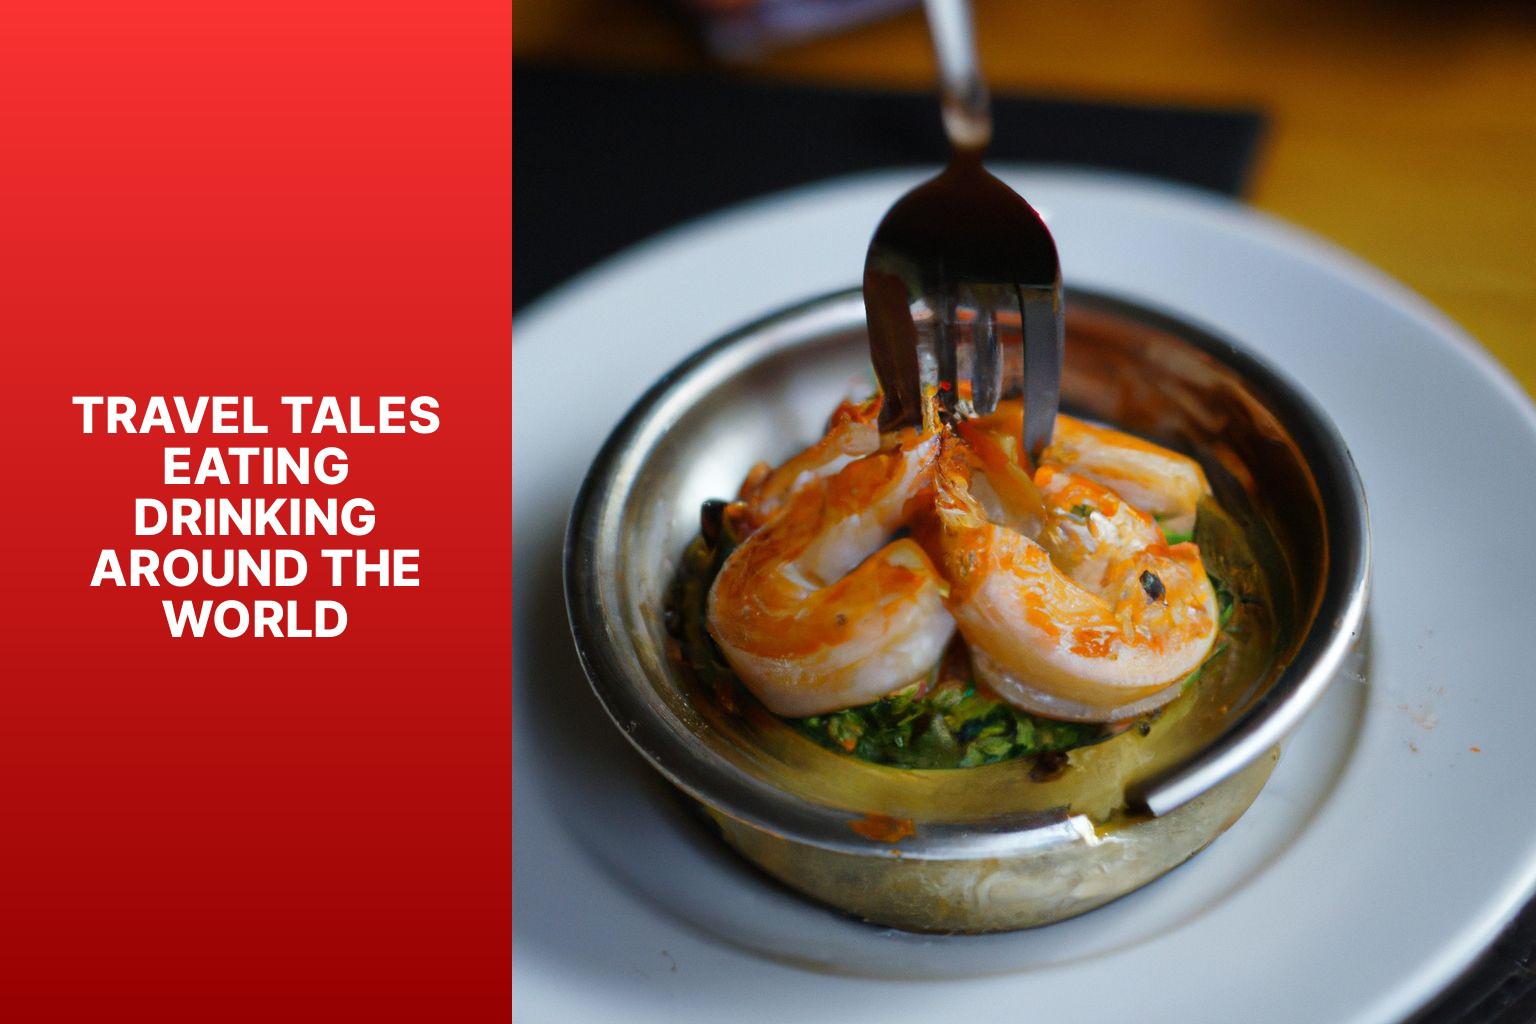 Travel Tales: Eating & Drinking Around the World